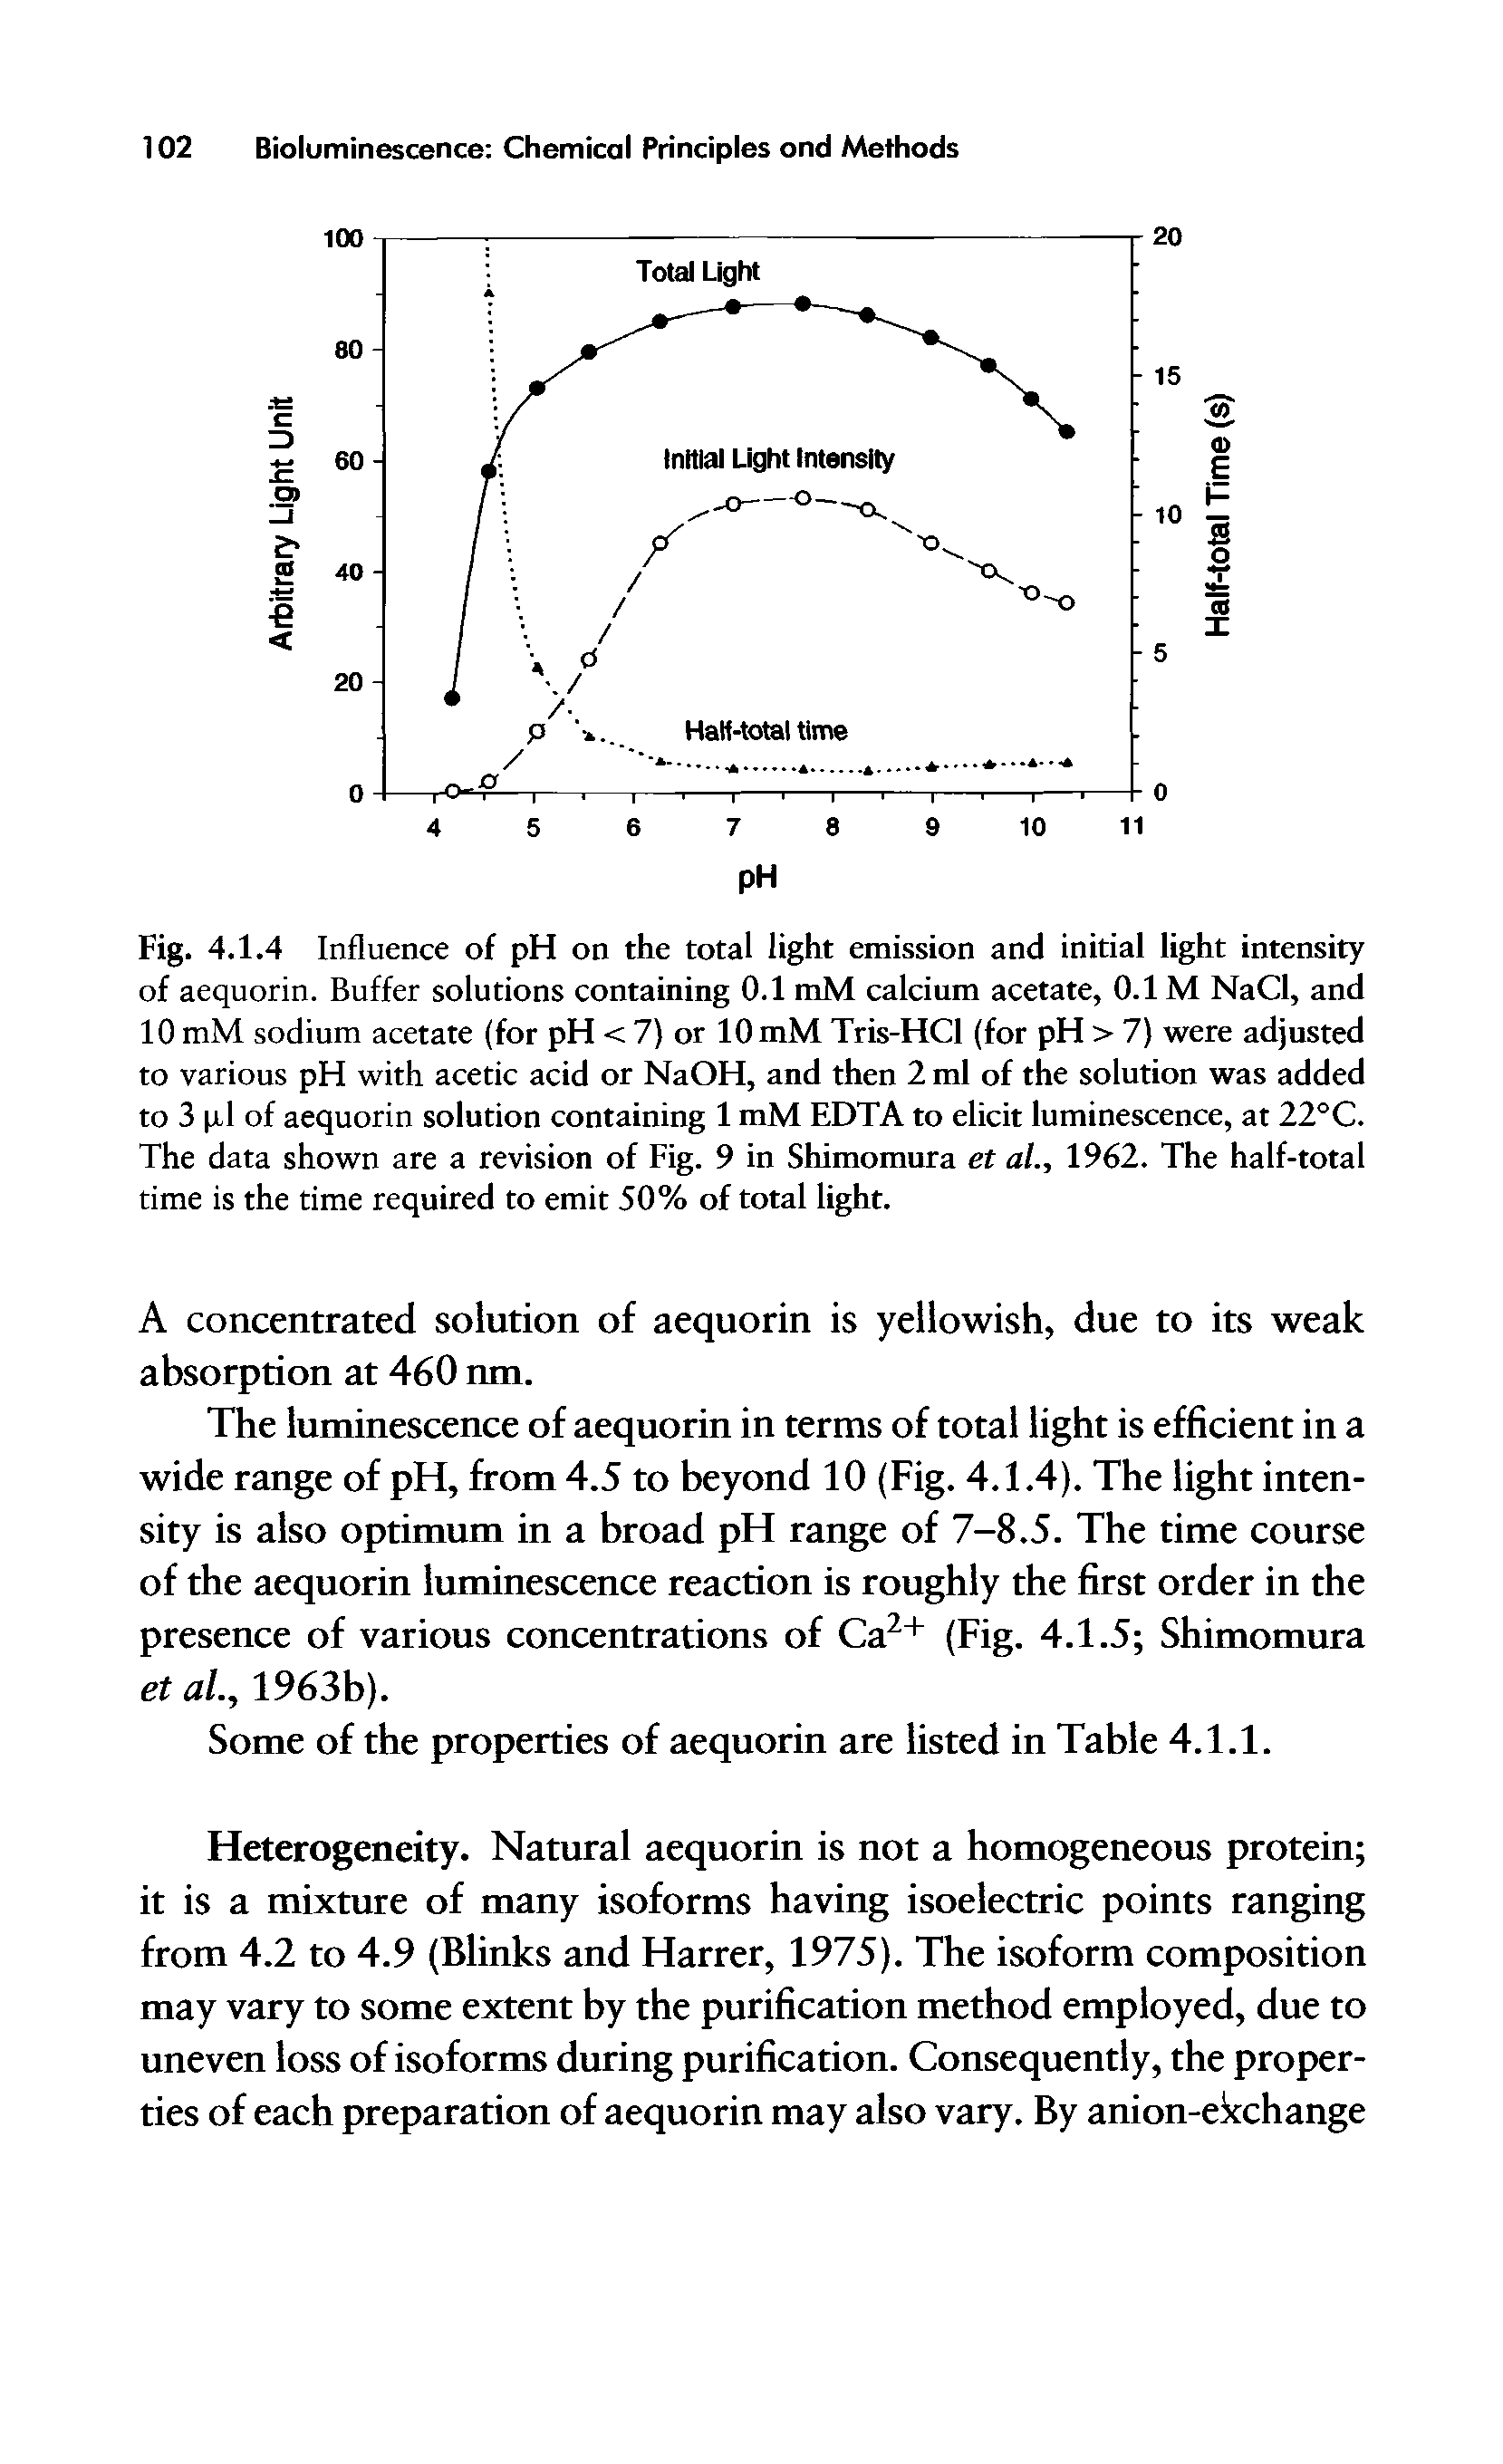 Fig. 4.1.4 Influence of pH on the total light emission and initial light intensity of aequorin. Buffer solutions containing 0.1 mM calcium acetate, 0.1 M NaCl, and 10 mM sodium acetate (for pH < 7) or 10 mM Tris-HCl (for pH > 7) were adjusted to various pH with acetic acid or NaOH, and then 2 ml of the solution was added to 3 pi of aequorin solution containing 1 mM EDTA to elicit luminescence, at 22°C. The data shown are a revision of Fig. 9 in Shimomura et al., 1962. The half-total time is the time required to emit 50% of total light.